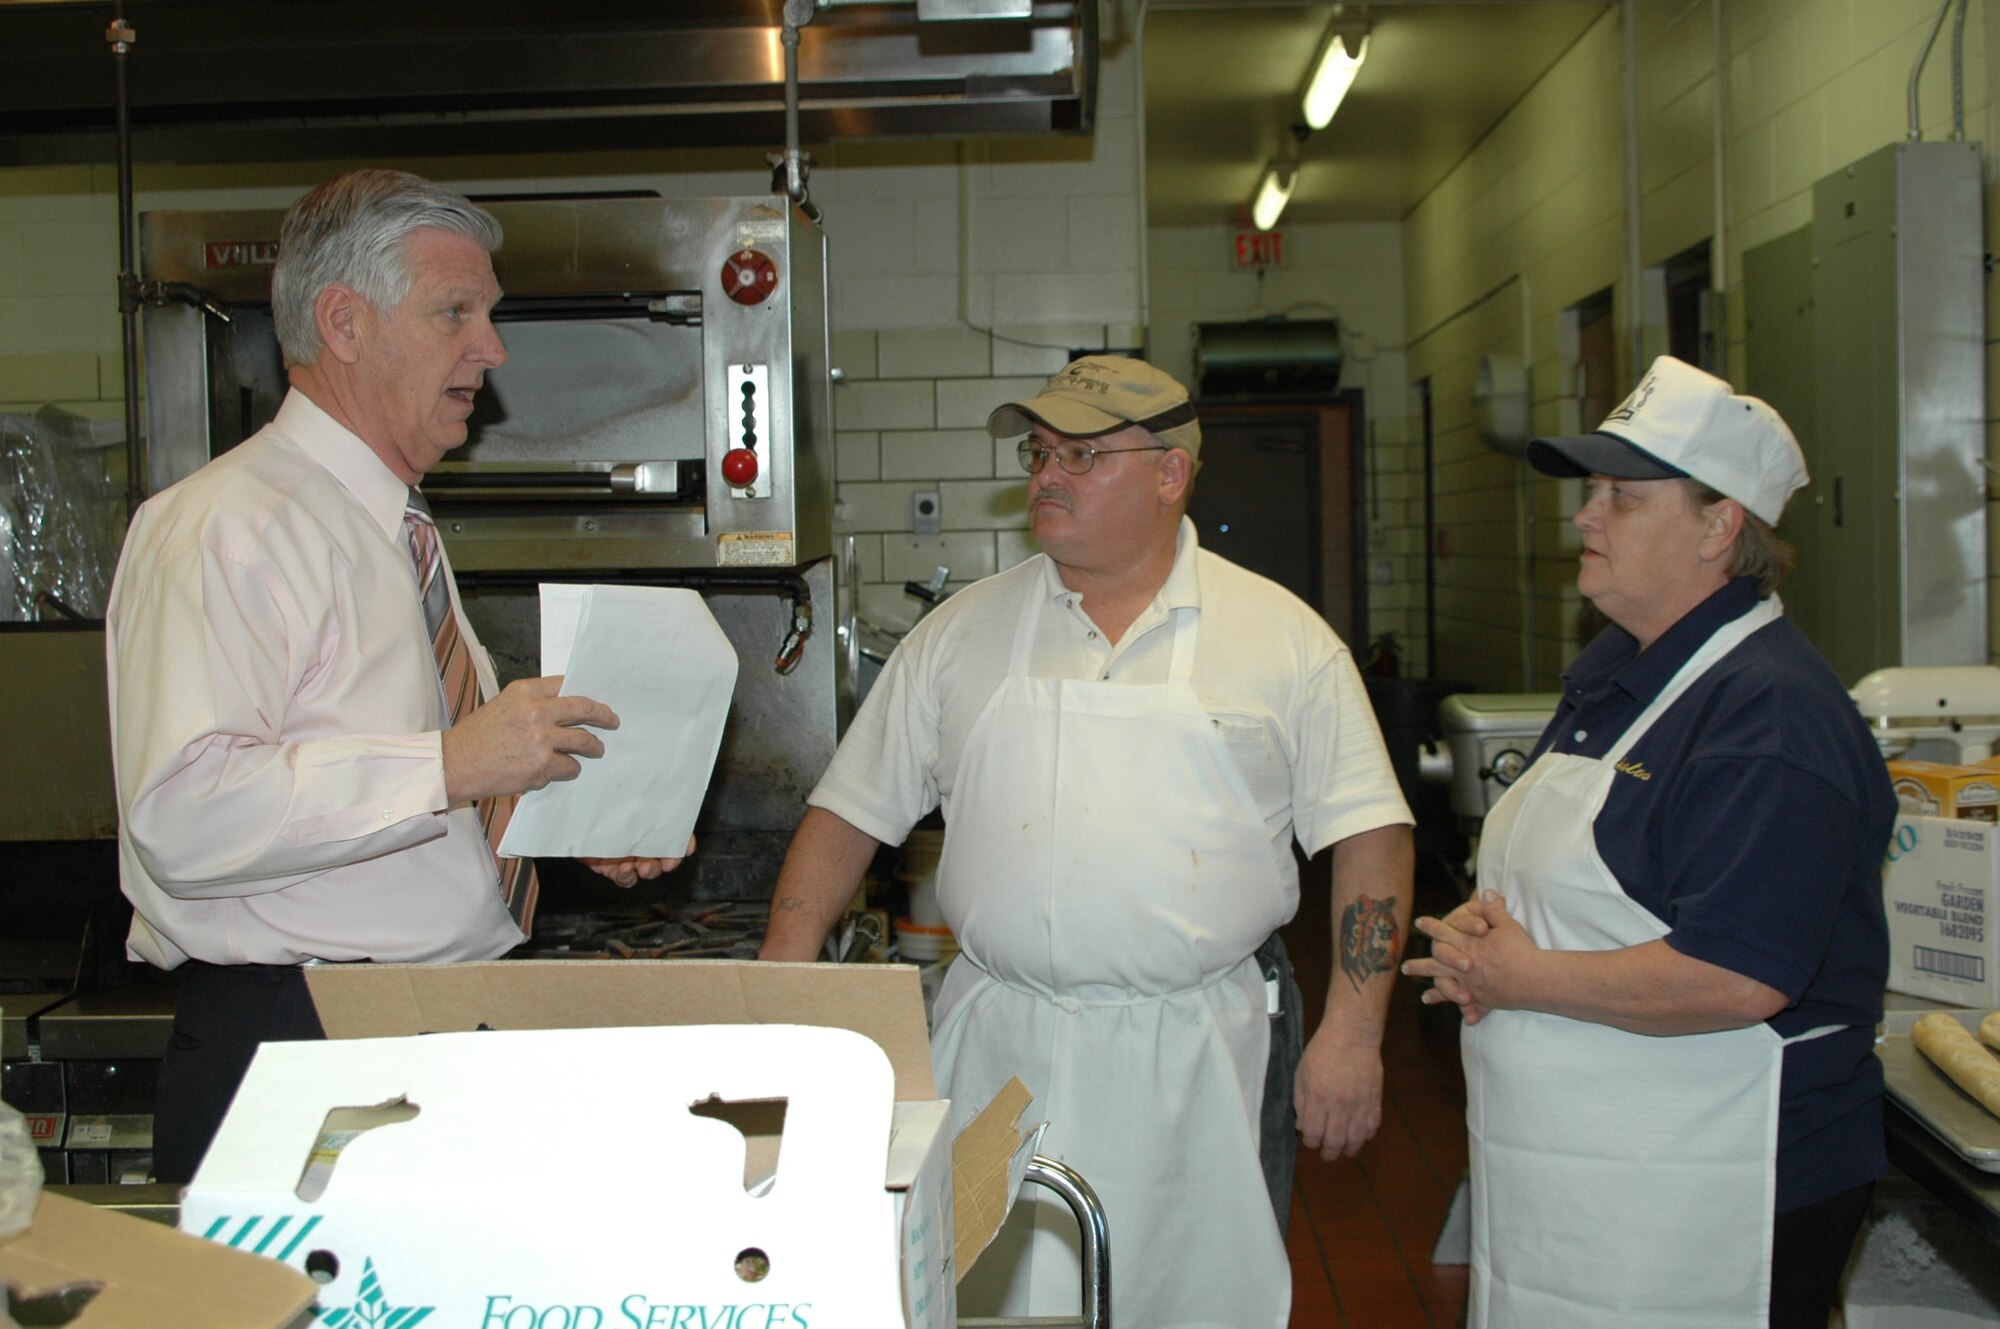 Garry Shaffer, Dakota's manager, speaks with Ms. Nancy Powers and Mr. Edward Newigham, Dakota's cooks, as they prepare to serve lunch.
Mr. Shaffer is the club's new manager and looks forward to revamping the club.